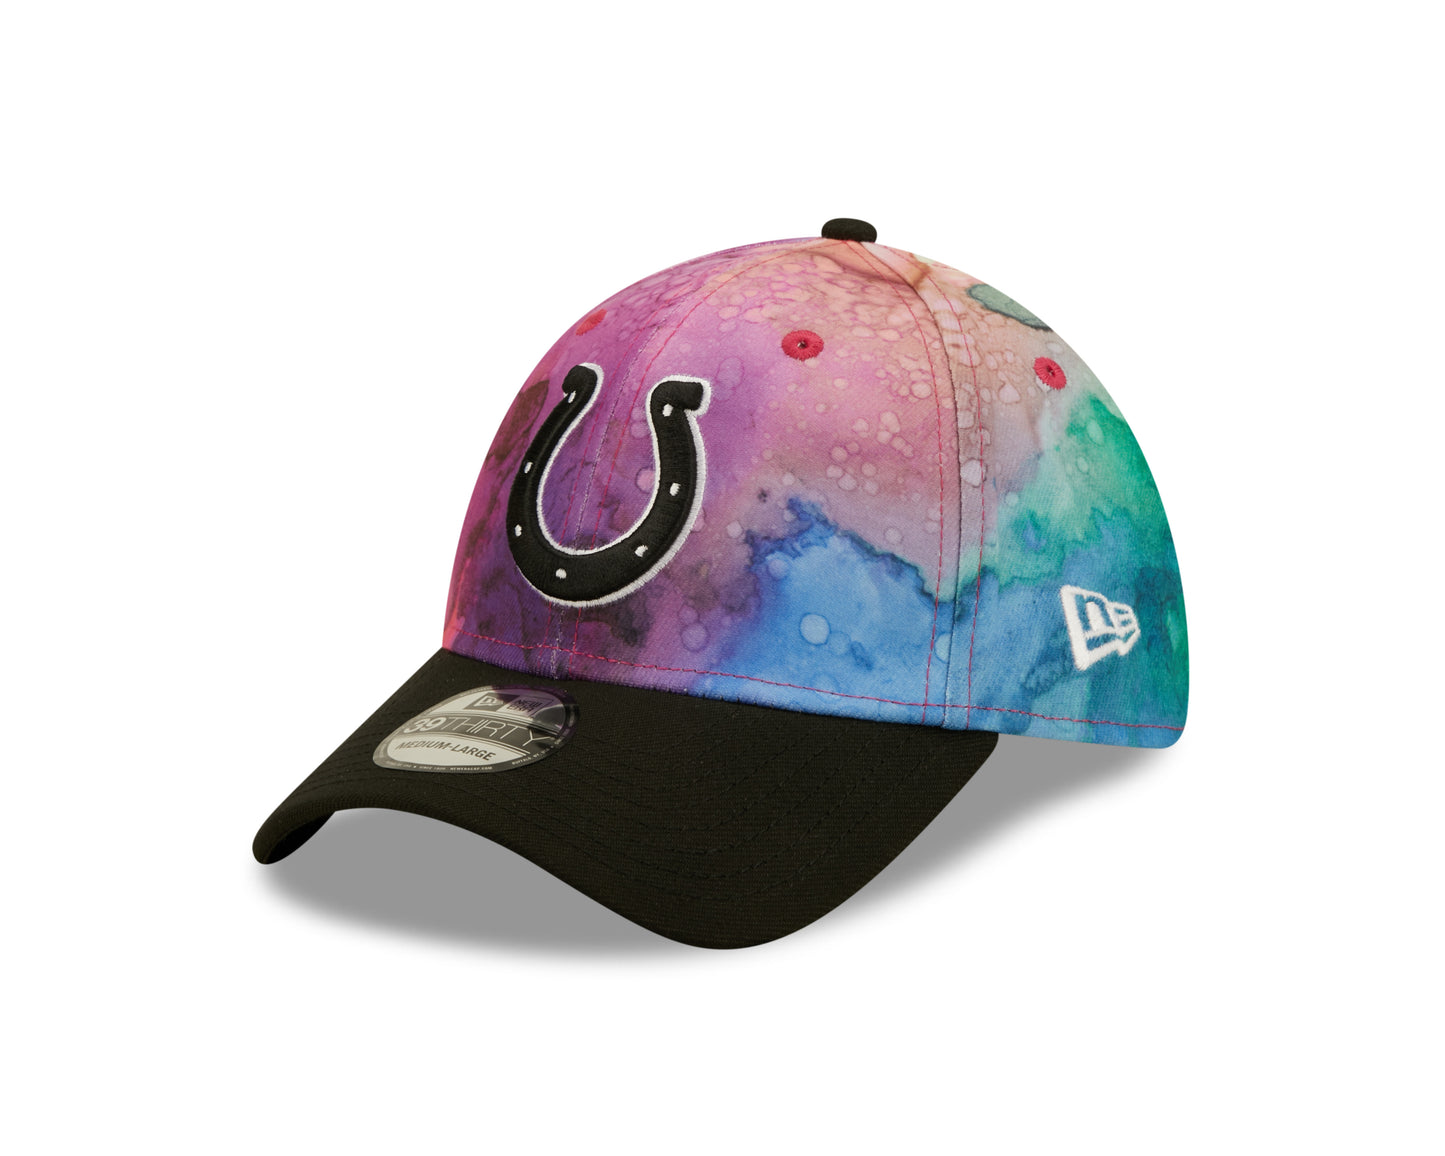 Indianapolis Colts Era  New Era Sideline Crucial Catch 39Thirty Hat-Ink Pink